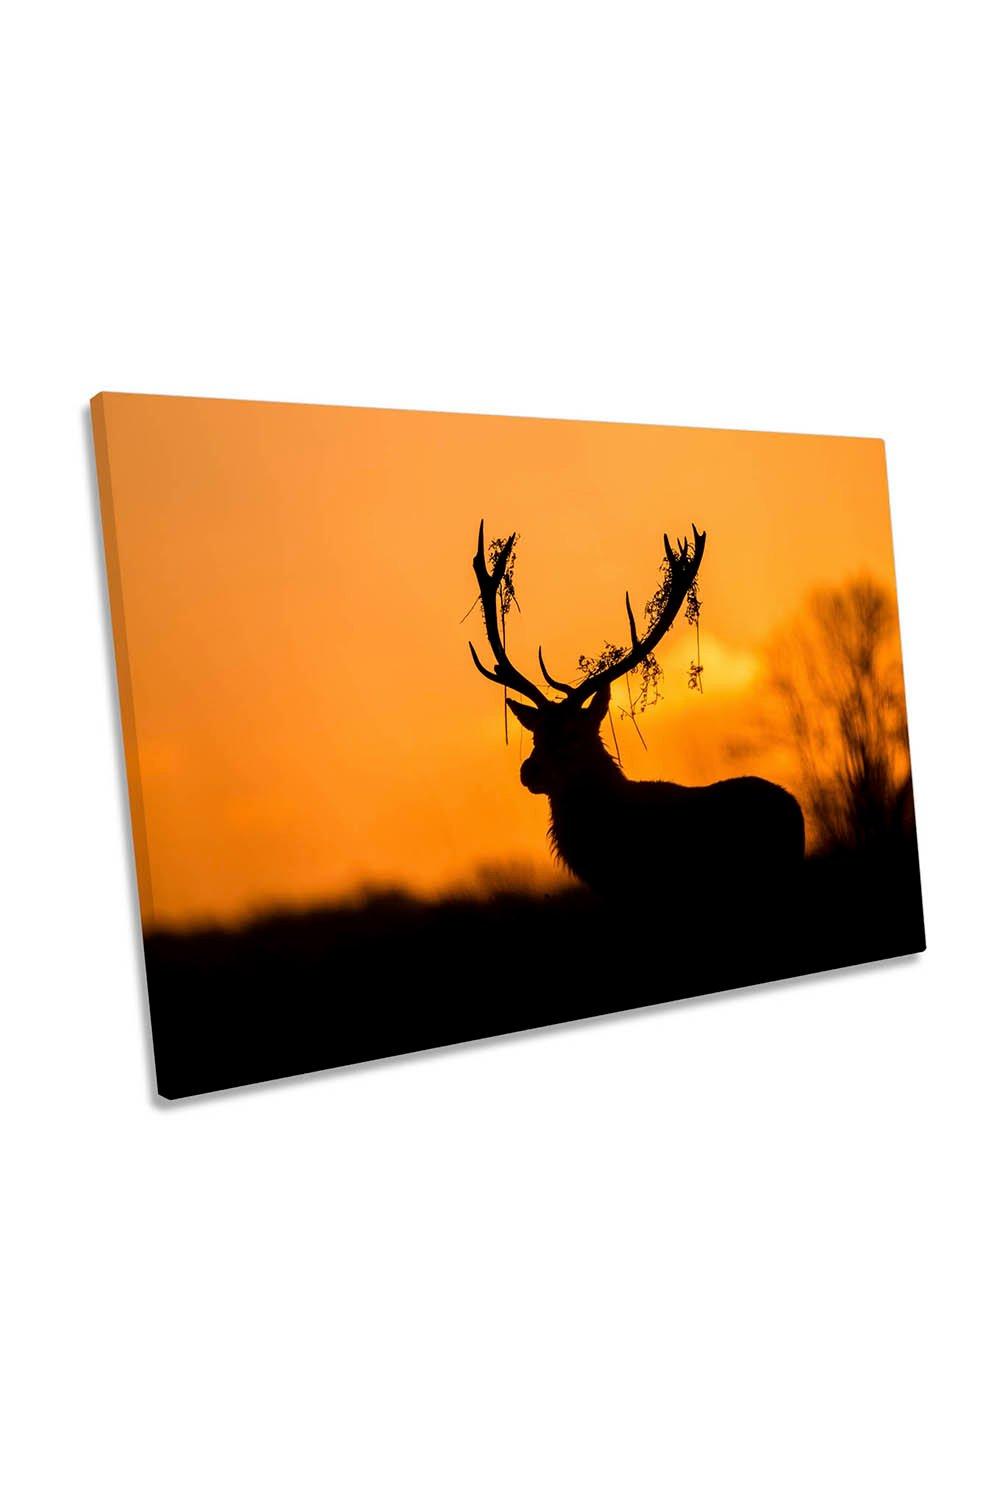 Deer Stag Antlers Sunset Silhouette Canvas Wall Art Picture Print